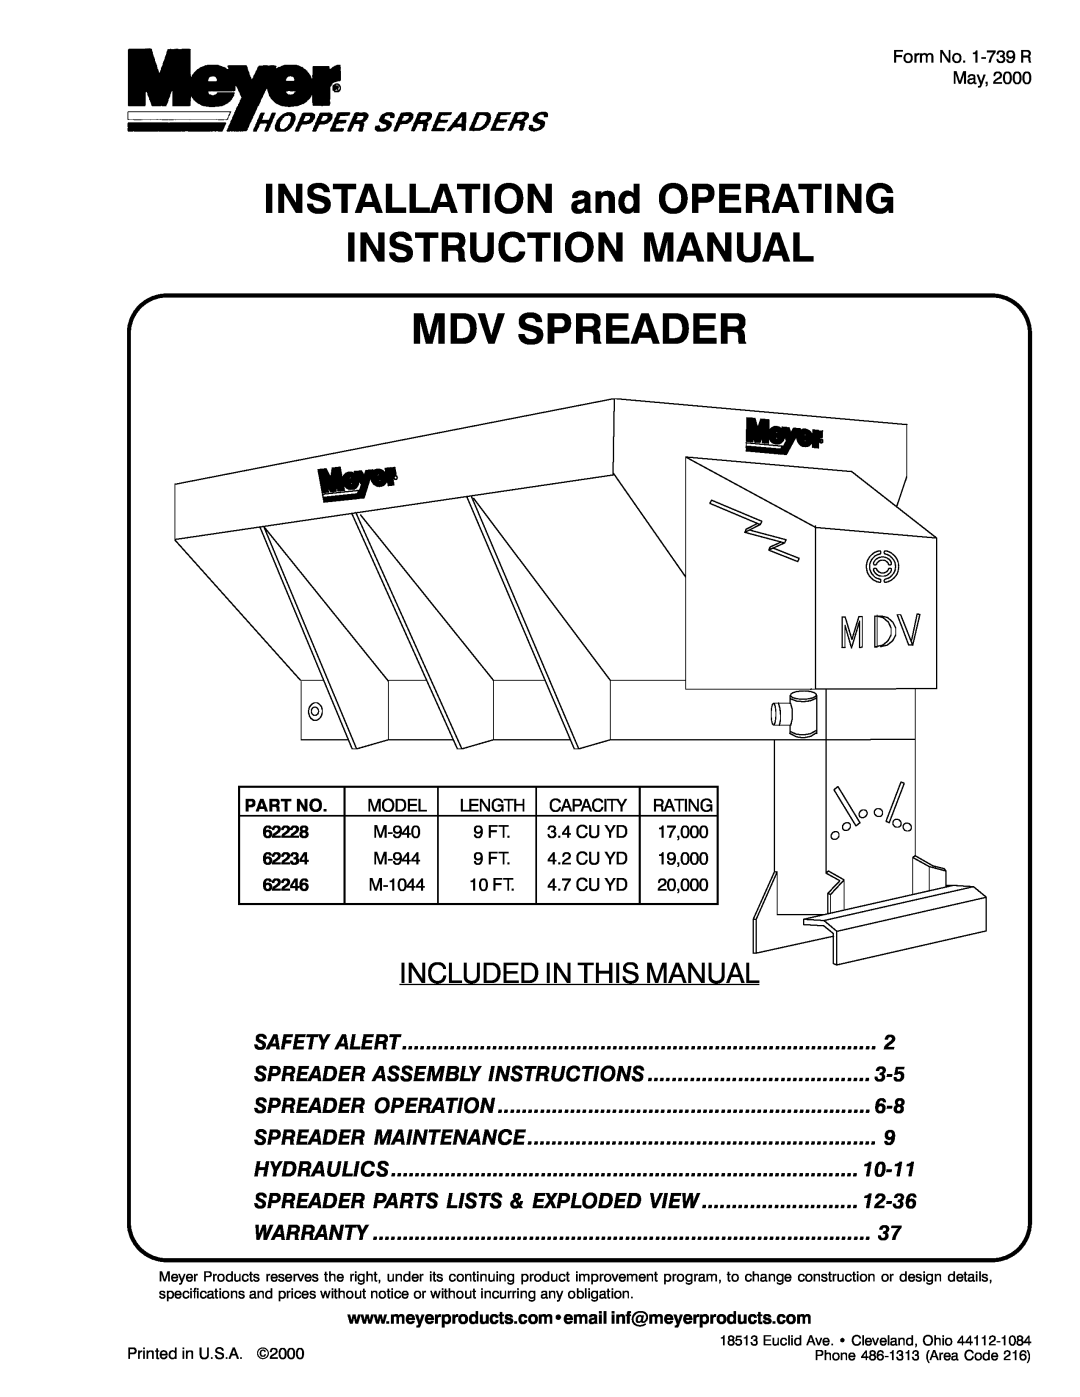 Power Acoustik M-940, M-944, M-1044 instruction manual Mdv Spreader, Included In This Manual 